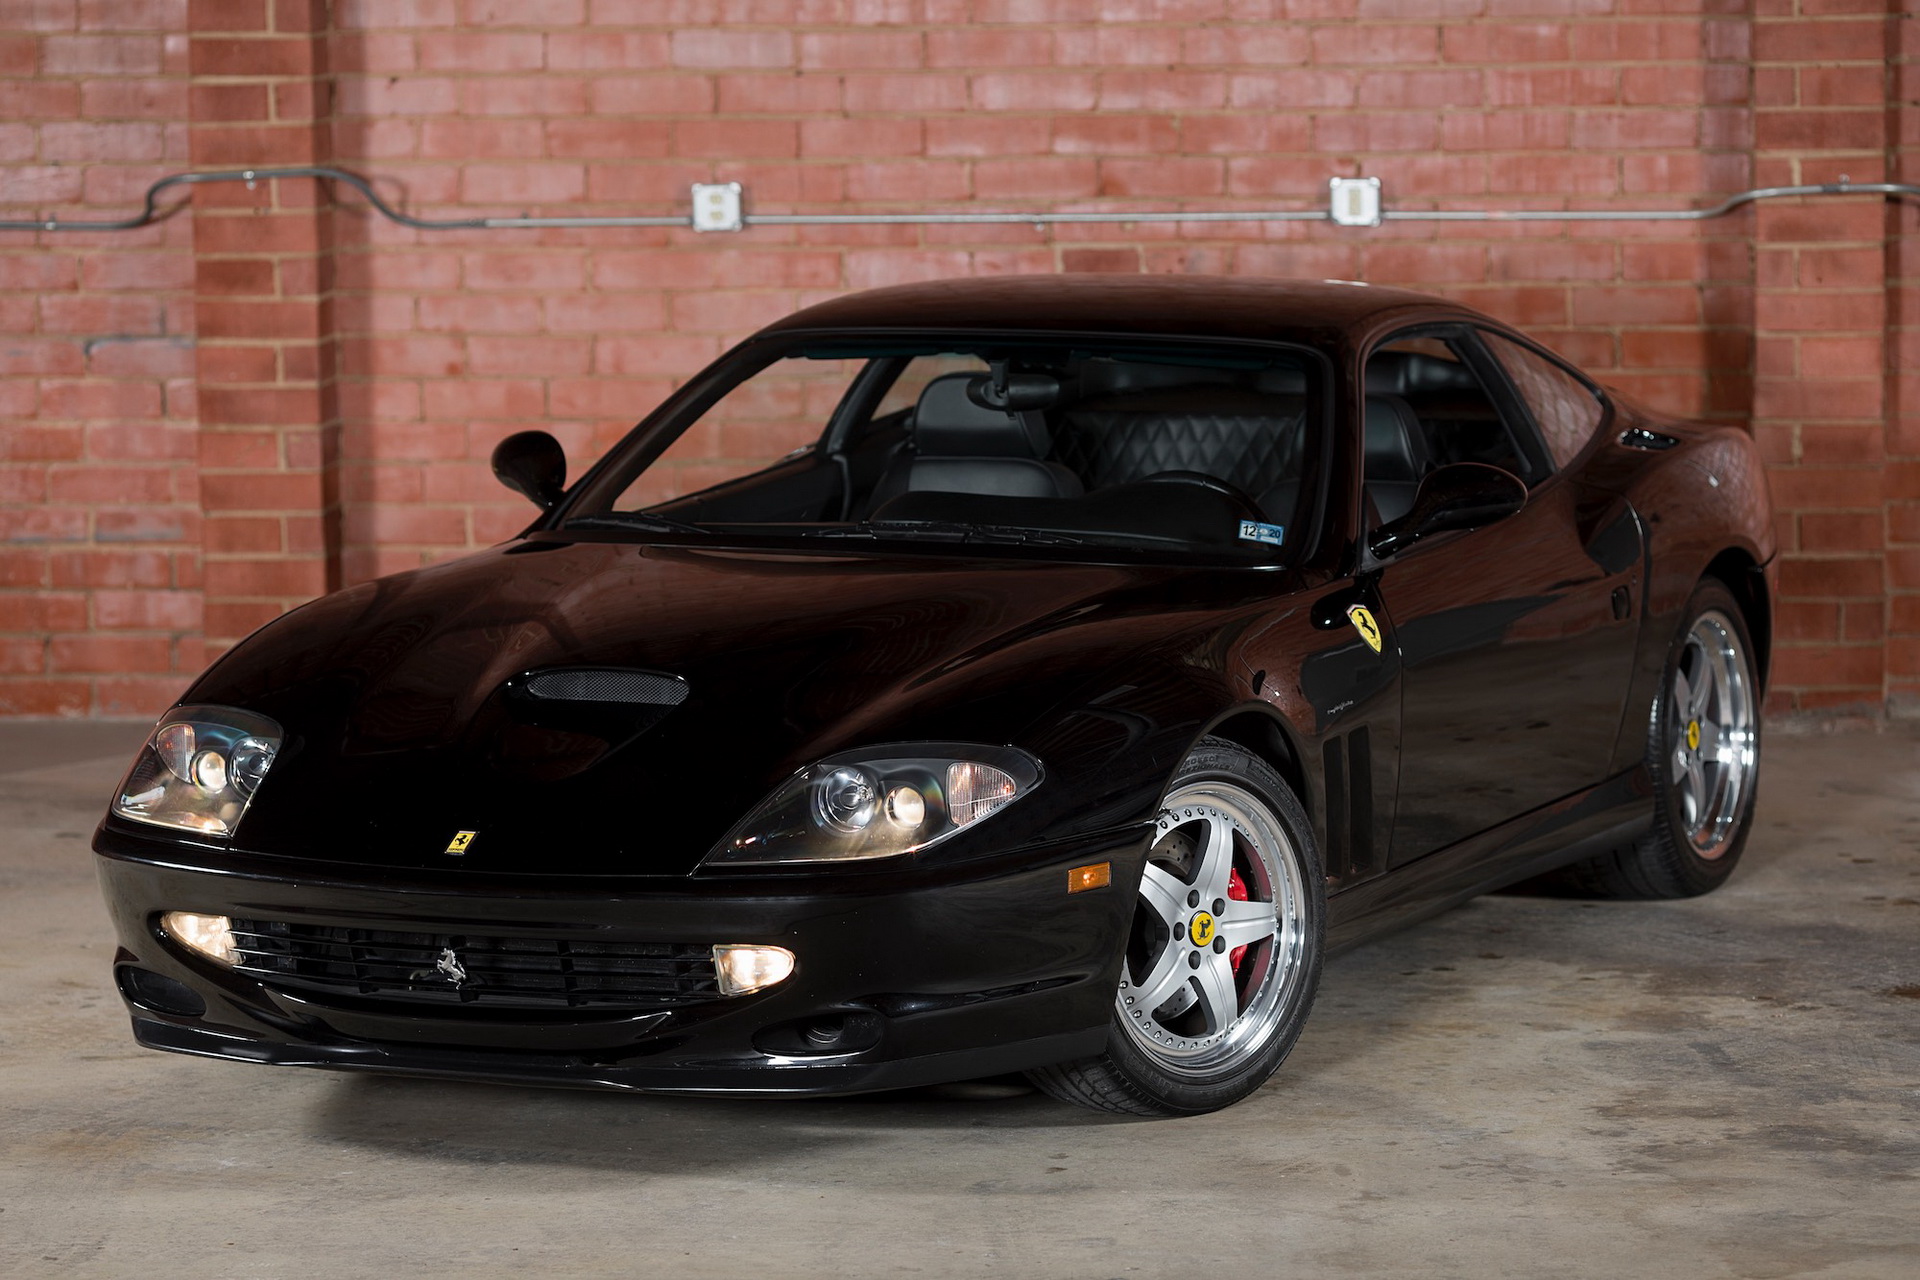 You Can Now Buy A Manual V12 Ferrari For Less Money Than A Toyota Supra Mk4 Carscoops